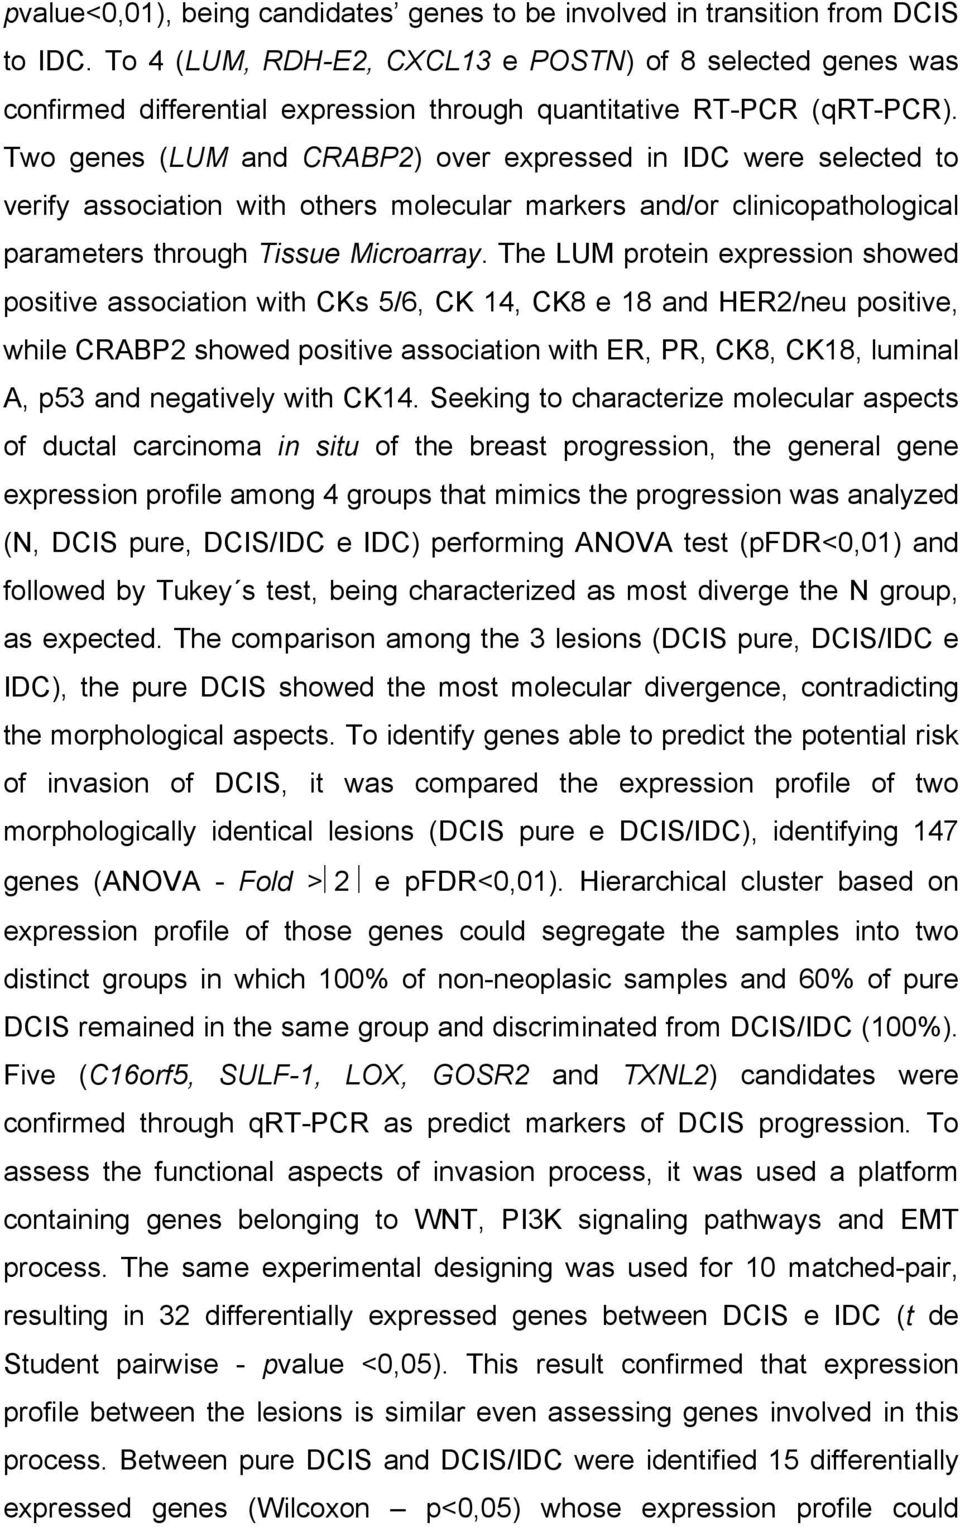 Two genes (LUM and CRABP2) over expressed in IDC were selected to verify association with others molecular markers and/or clinicopathological parameters through Tissue Microarray.